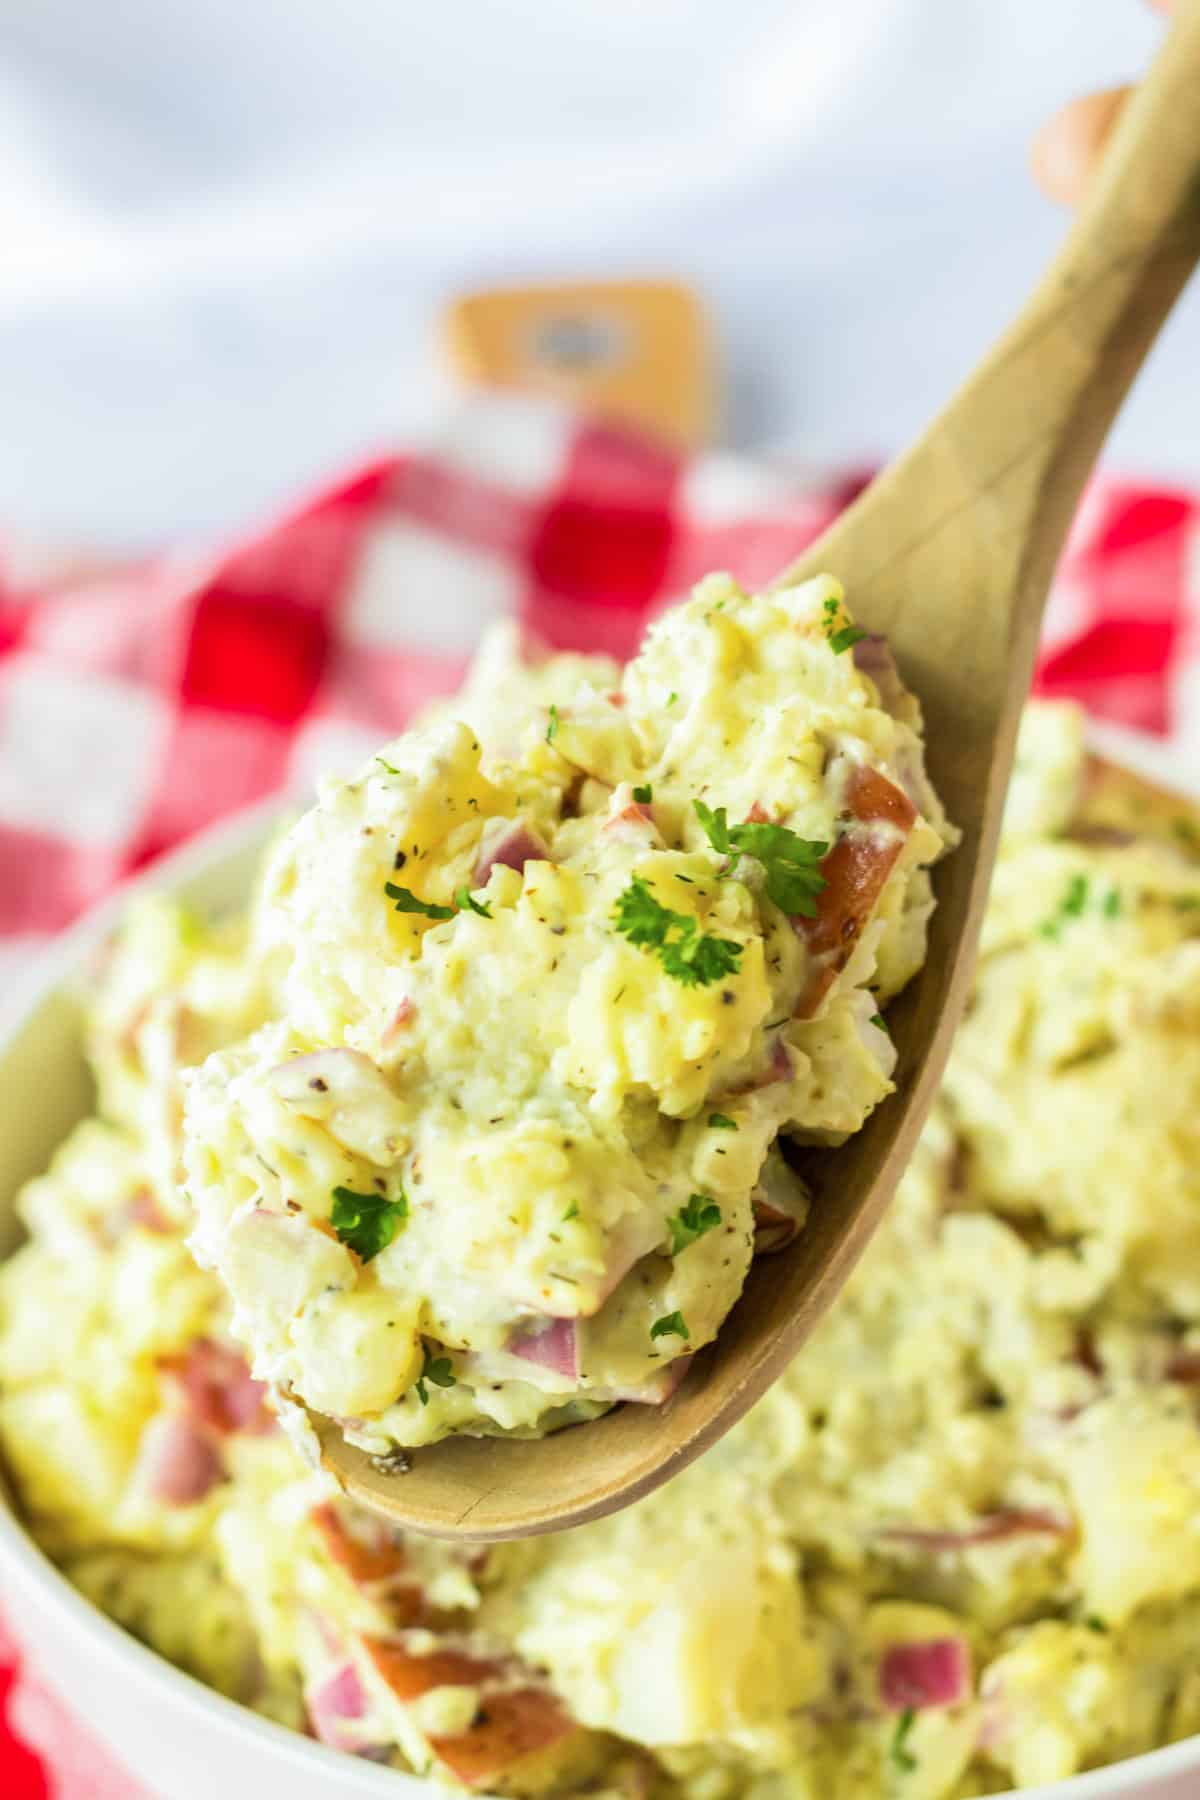 Red skin potato salad in a wooden spoon being lifted from bowl.